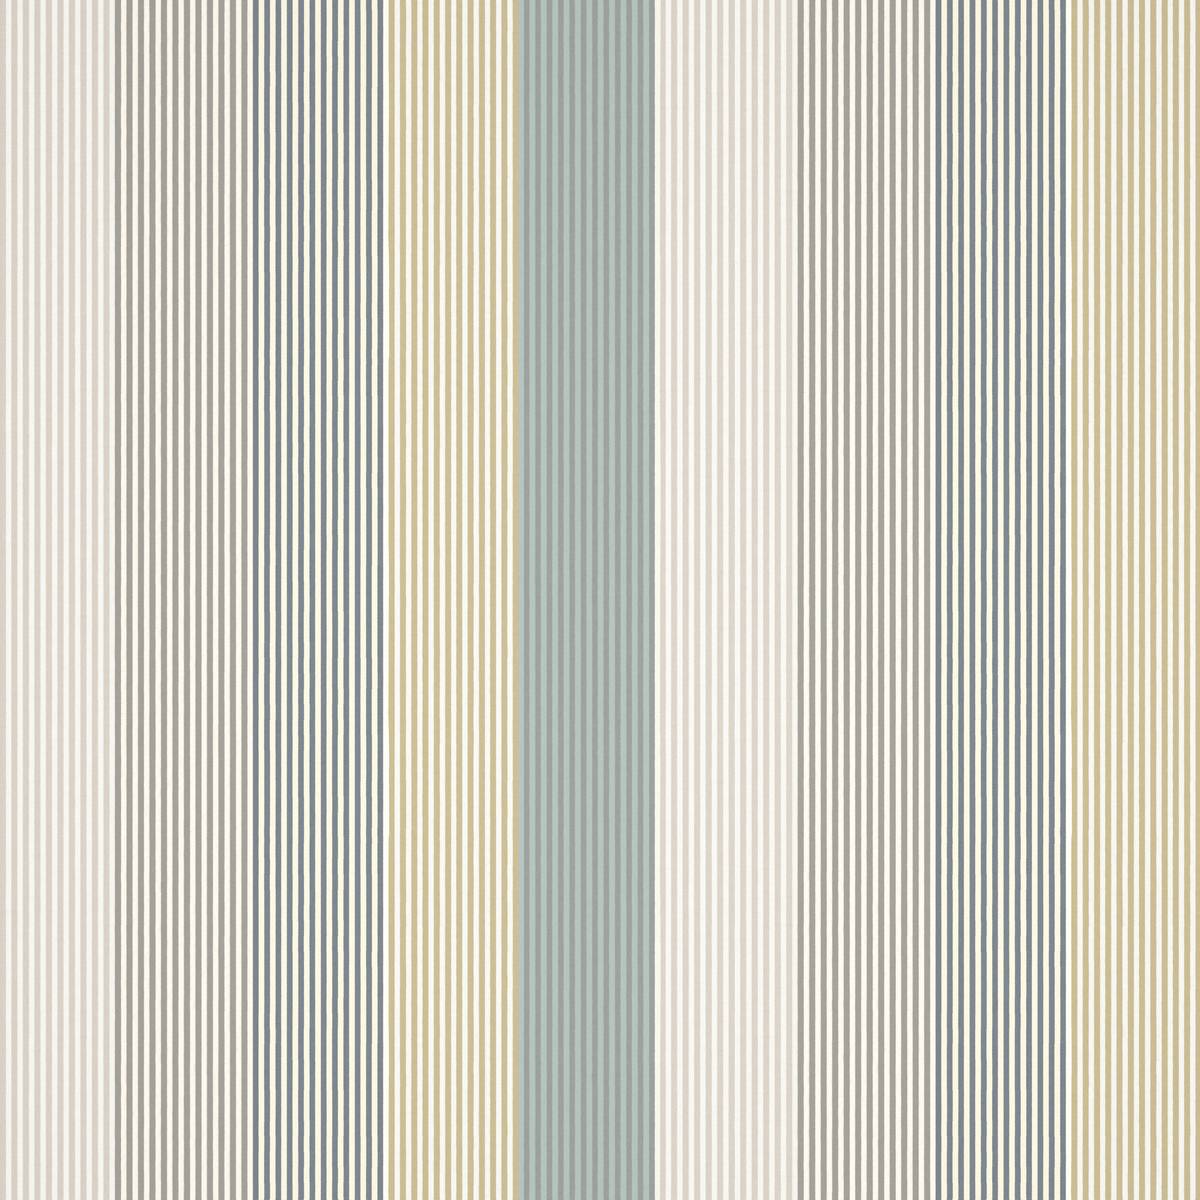 Funfair Stripe Calico/Cloud/Pebble/Duckegg Fabric by Harlequin